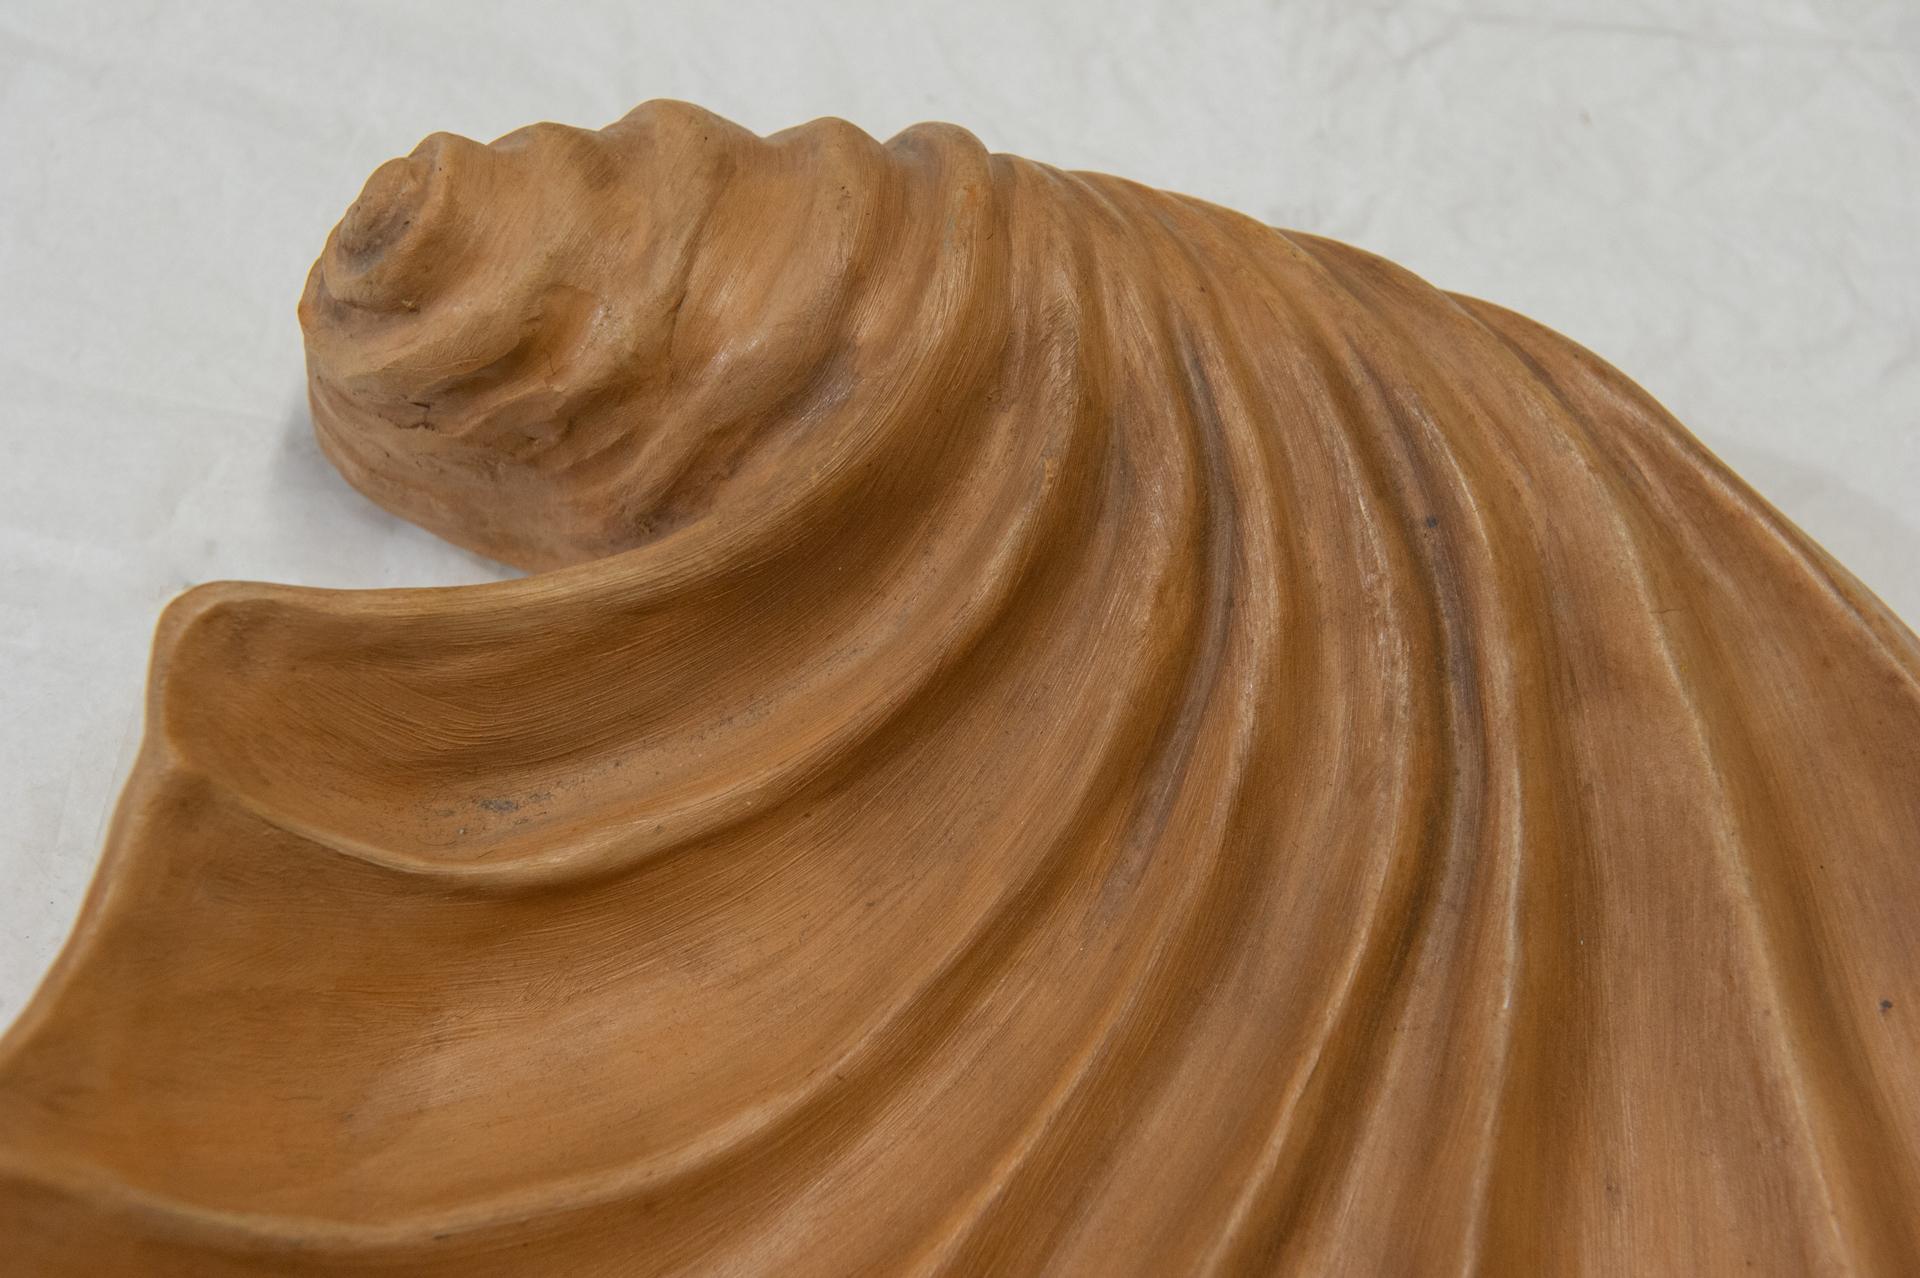 Other Terracotta Plate Modeled by Hand in the Shape of a Shell For Sale